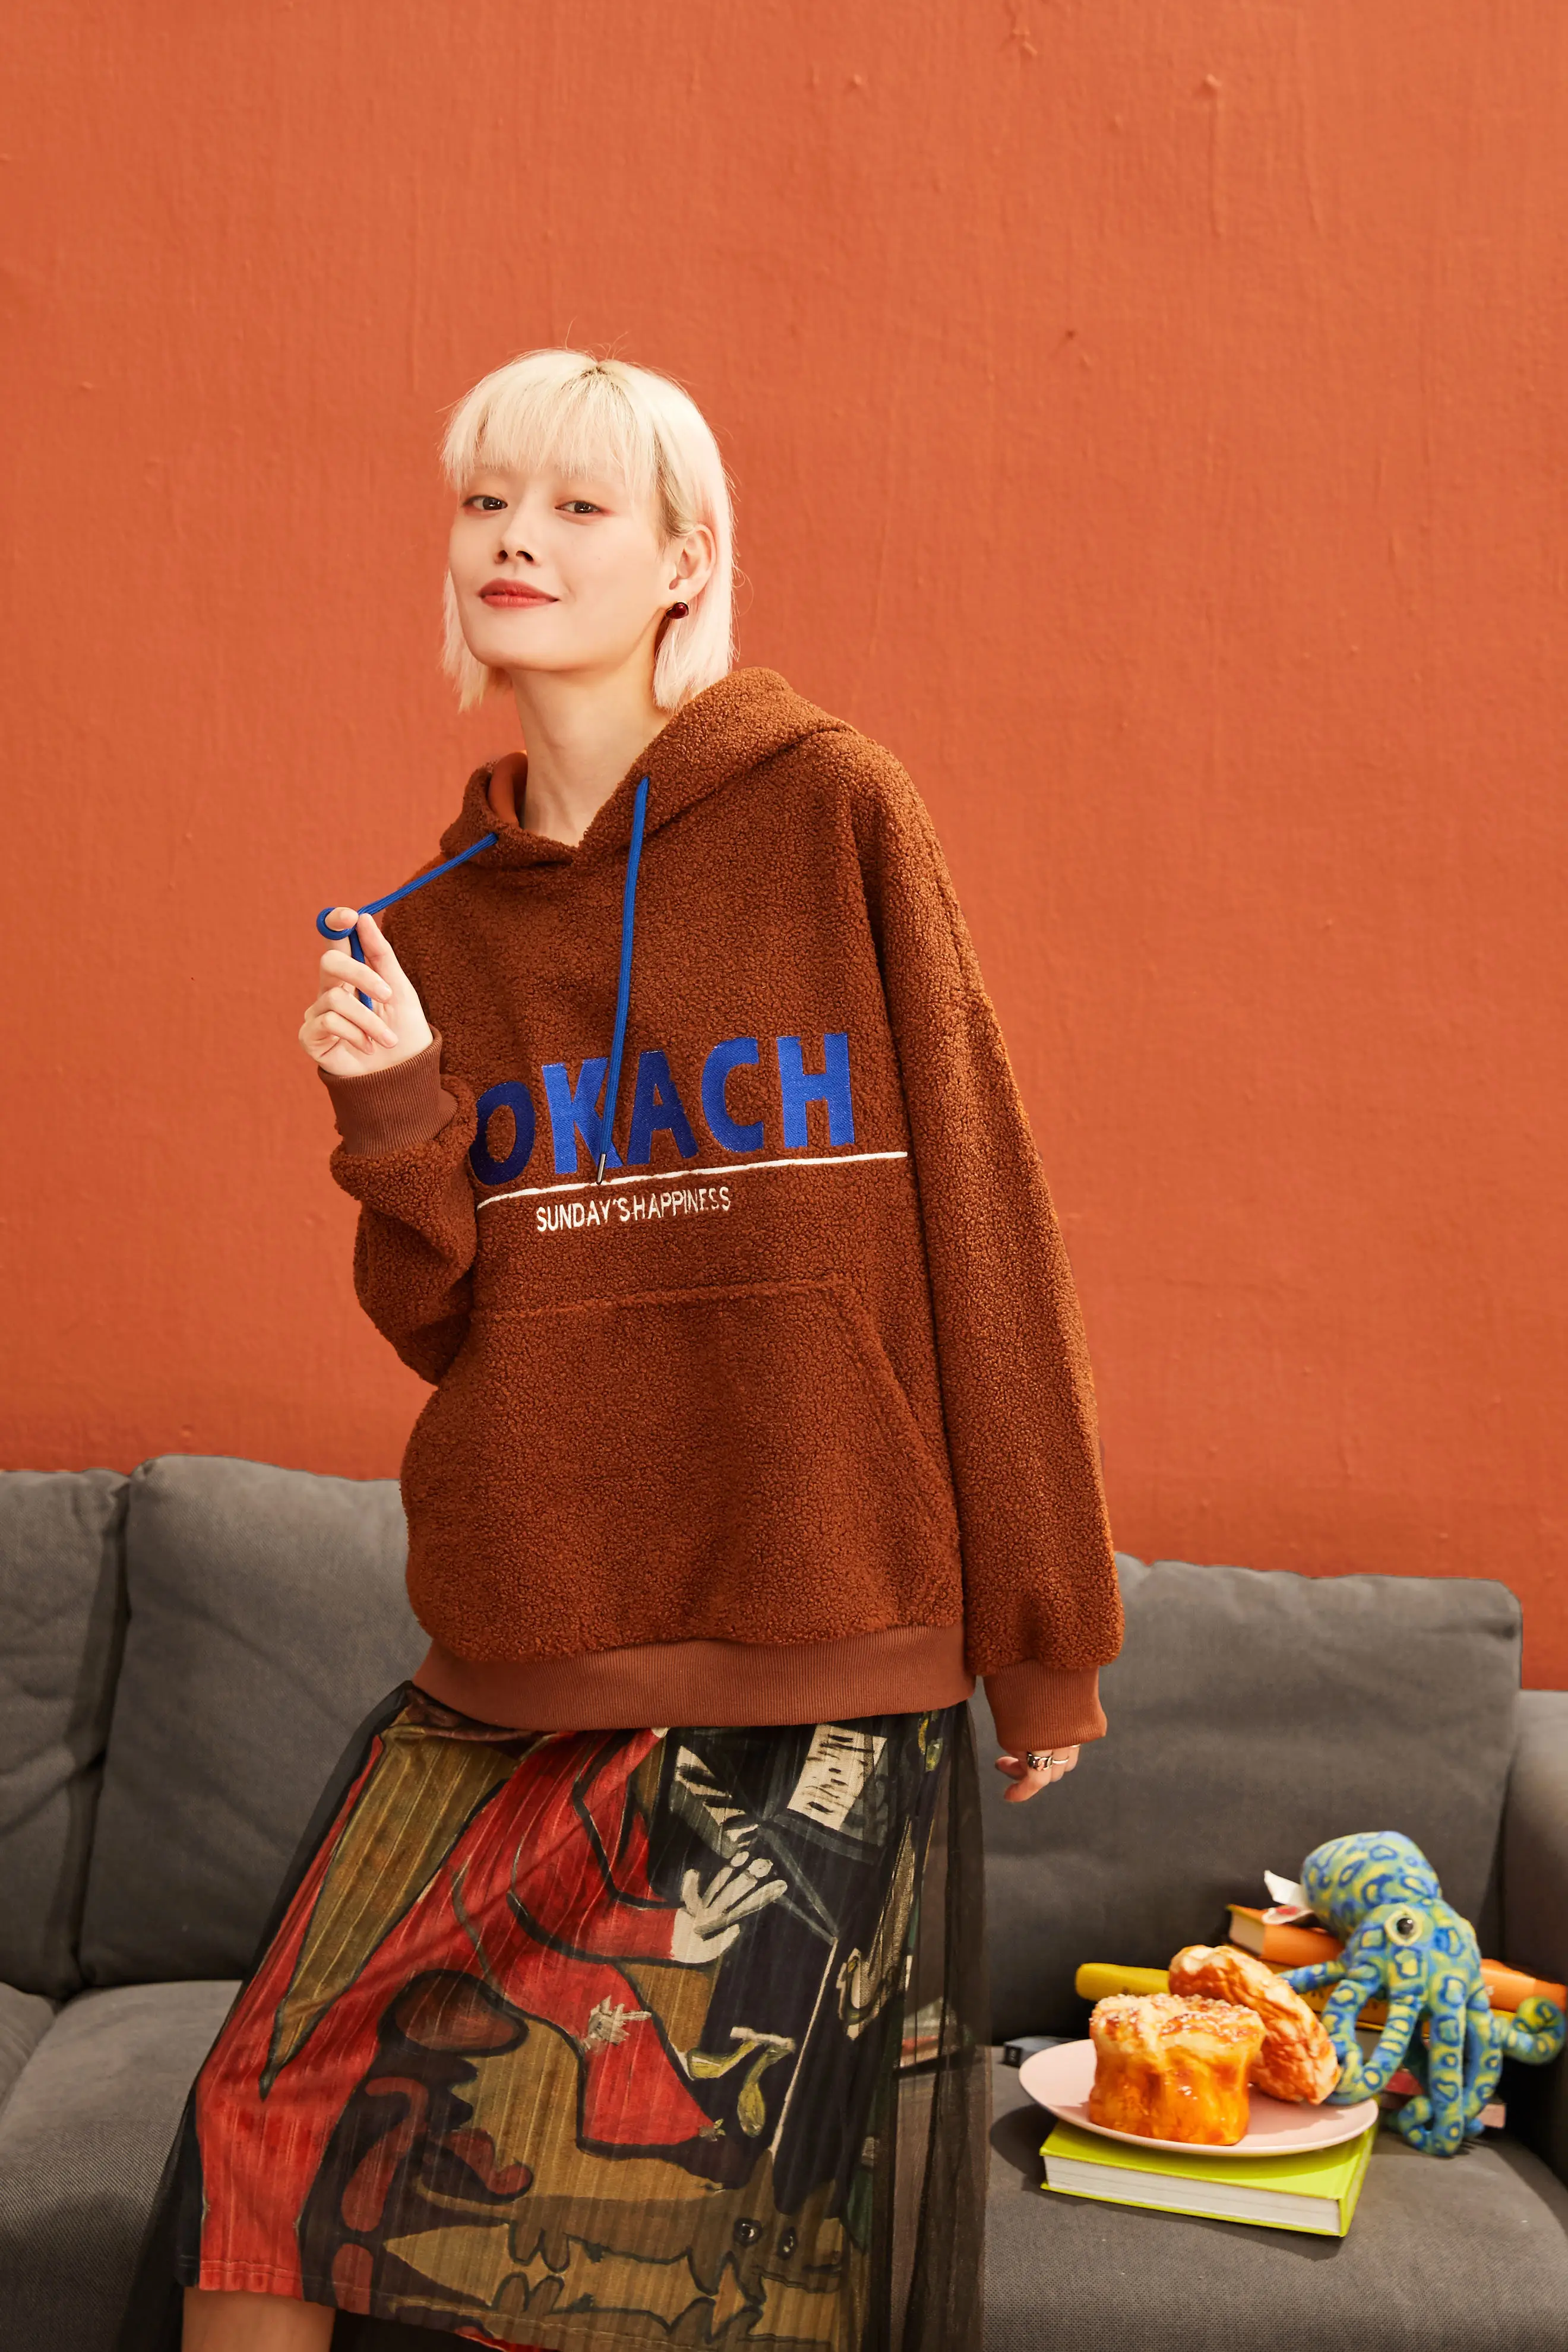 SAM'S TREE Solid Teddy Lazy Letter Embroidery Hoodies Sweatshirt Women Autumn Straight Long Sleeve Casual Female Daily Tops